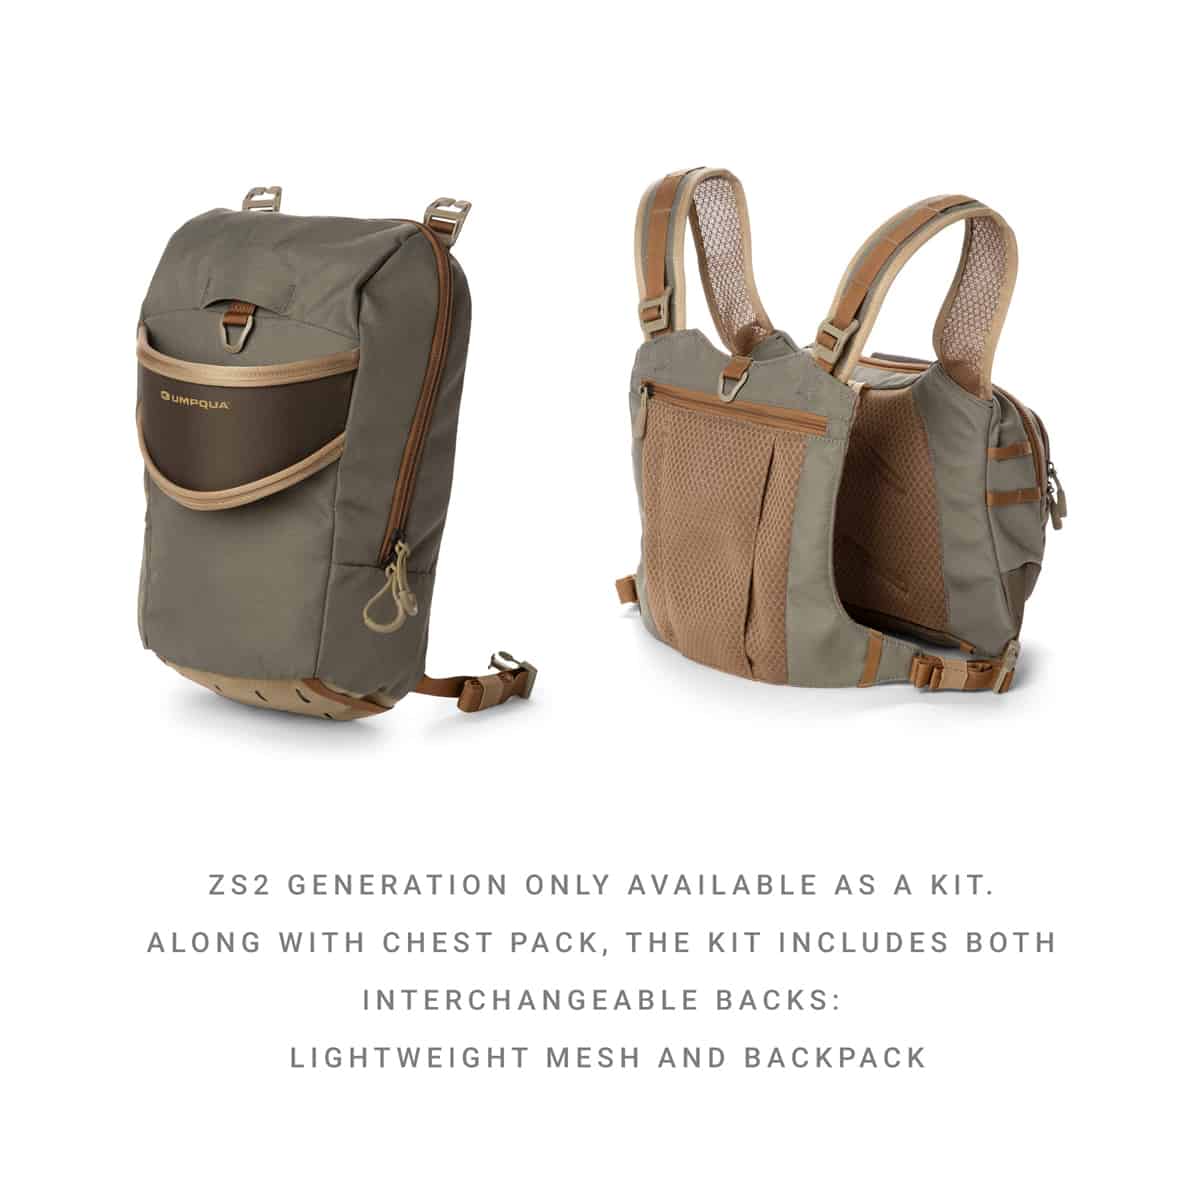 ZS2 Generation Umpqua Overlook 500 only available as a kit. Along with chest pack, the kit includes both interchangeable backs; lightweight mesh and small backpack